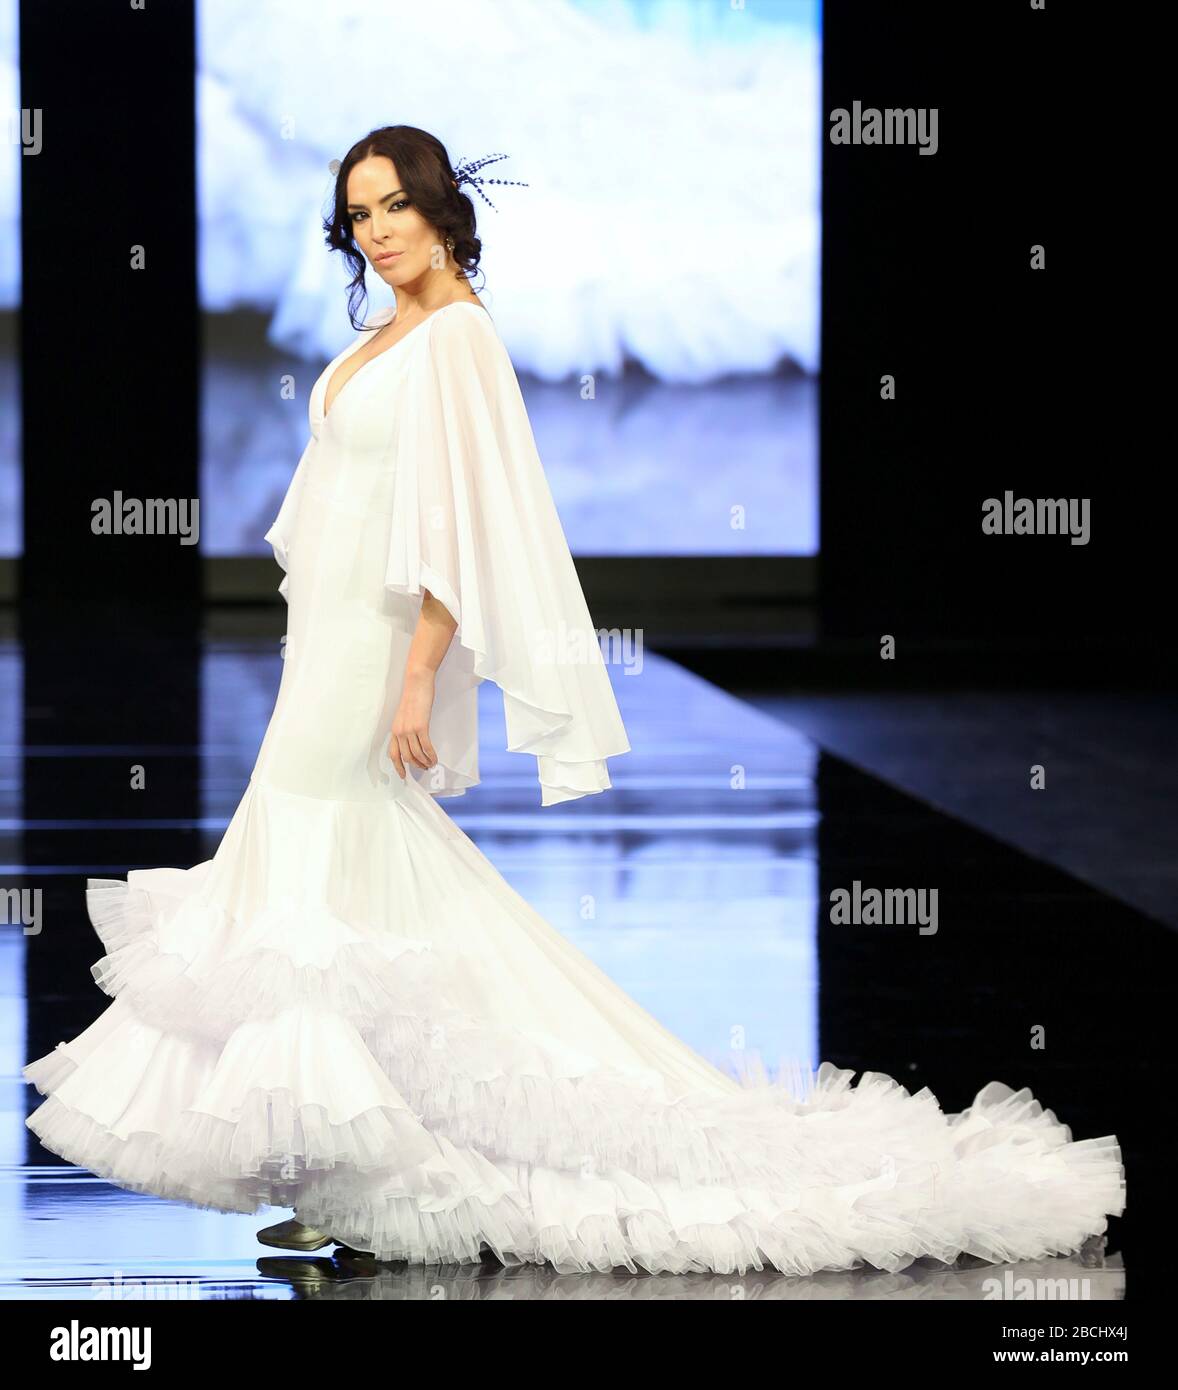 SEVILLA, SPAIN - JAN 30: model Maria Ramos Rivas wearing a white dress from the Grasse collection of designer Fran Solis during the SIMOF 2020 (Photo credit: Mickael Chavet) Stock Photo